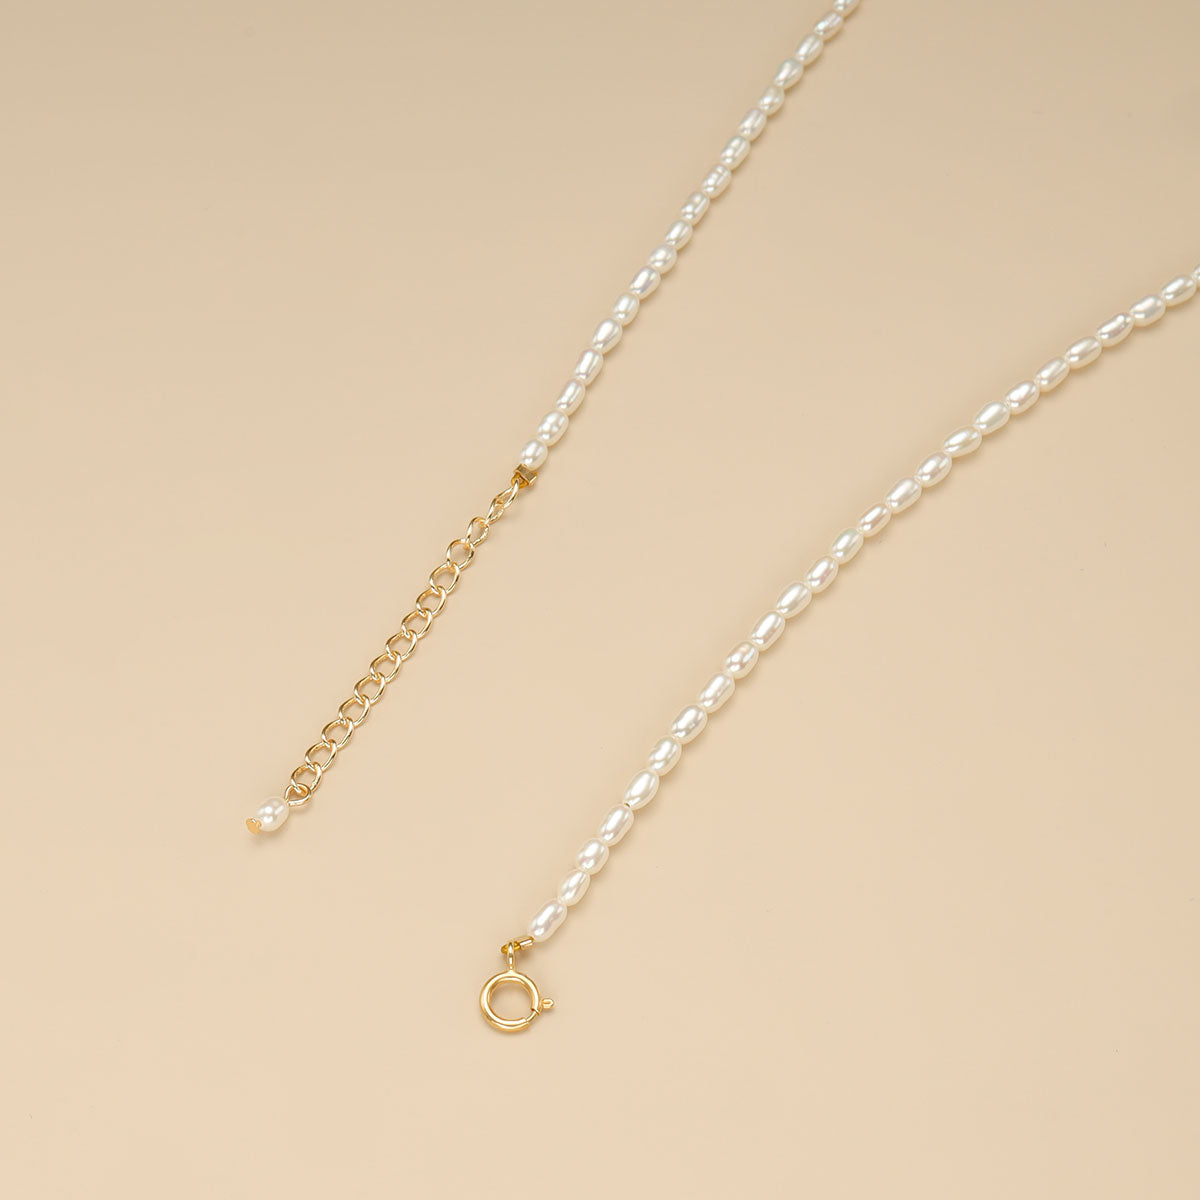 The spring ring clasp of handmade pearl necklace.